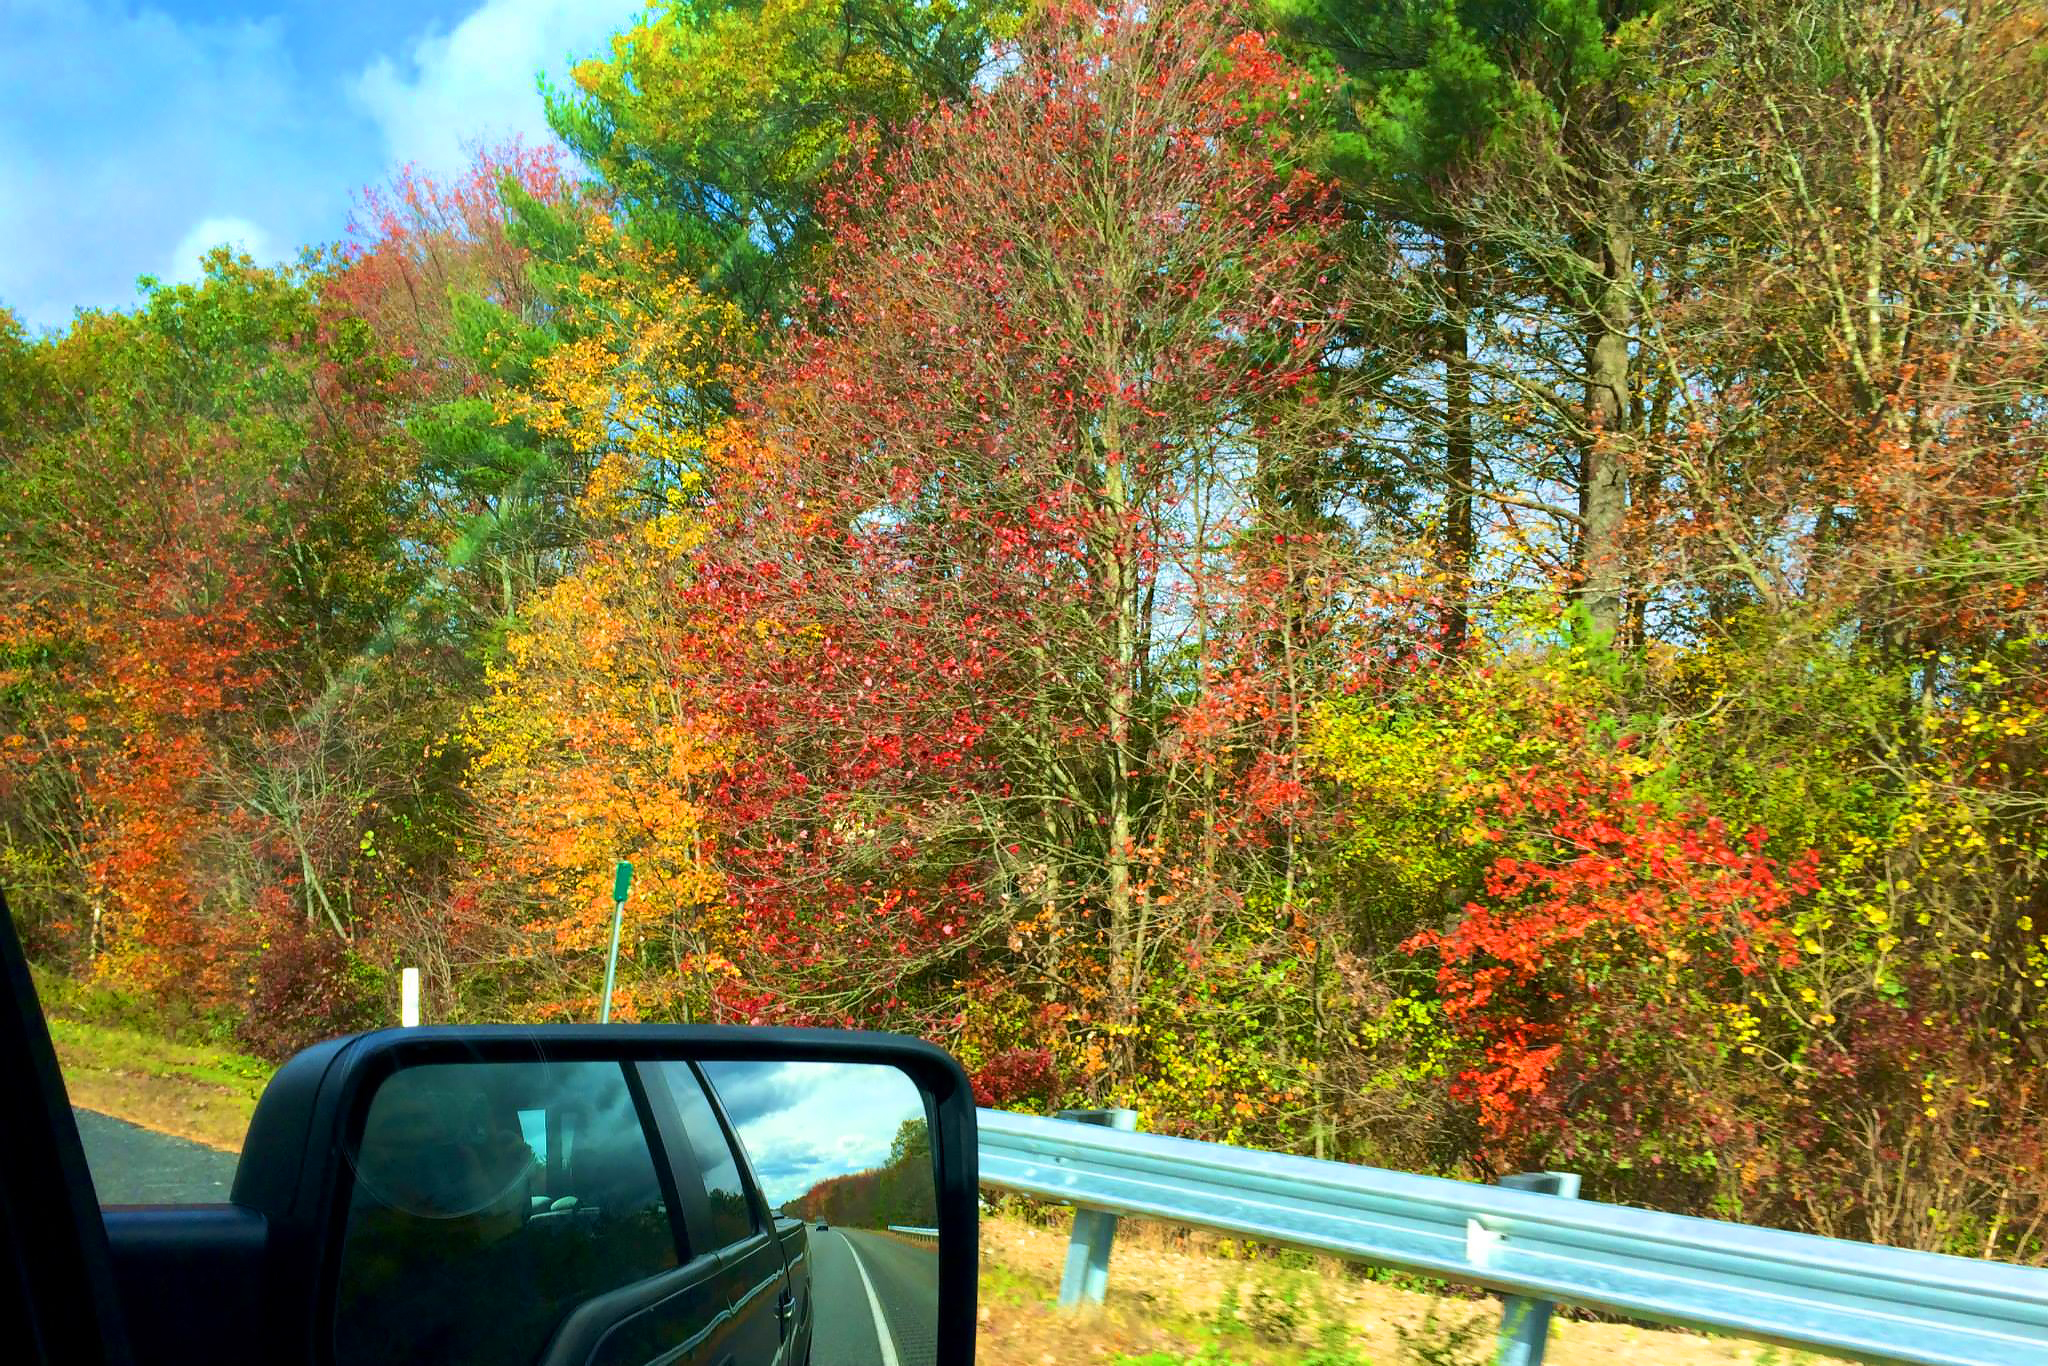 While driving home I snapped this pic in Connecticut